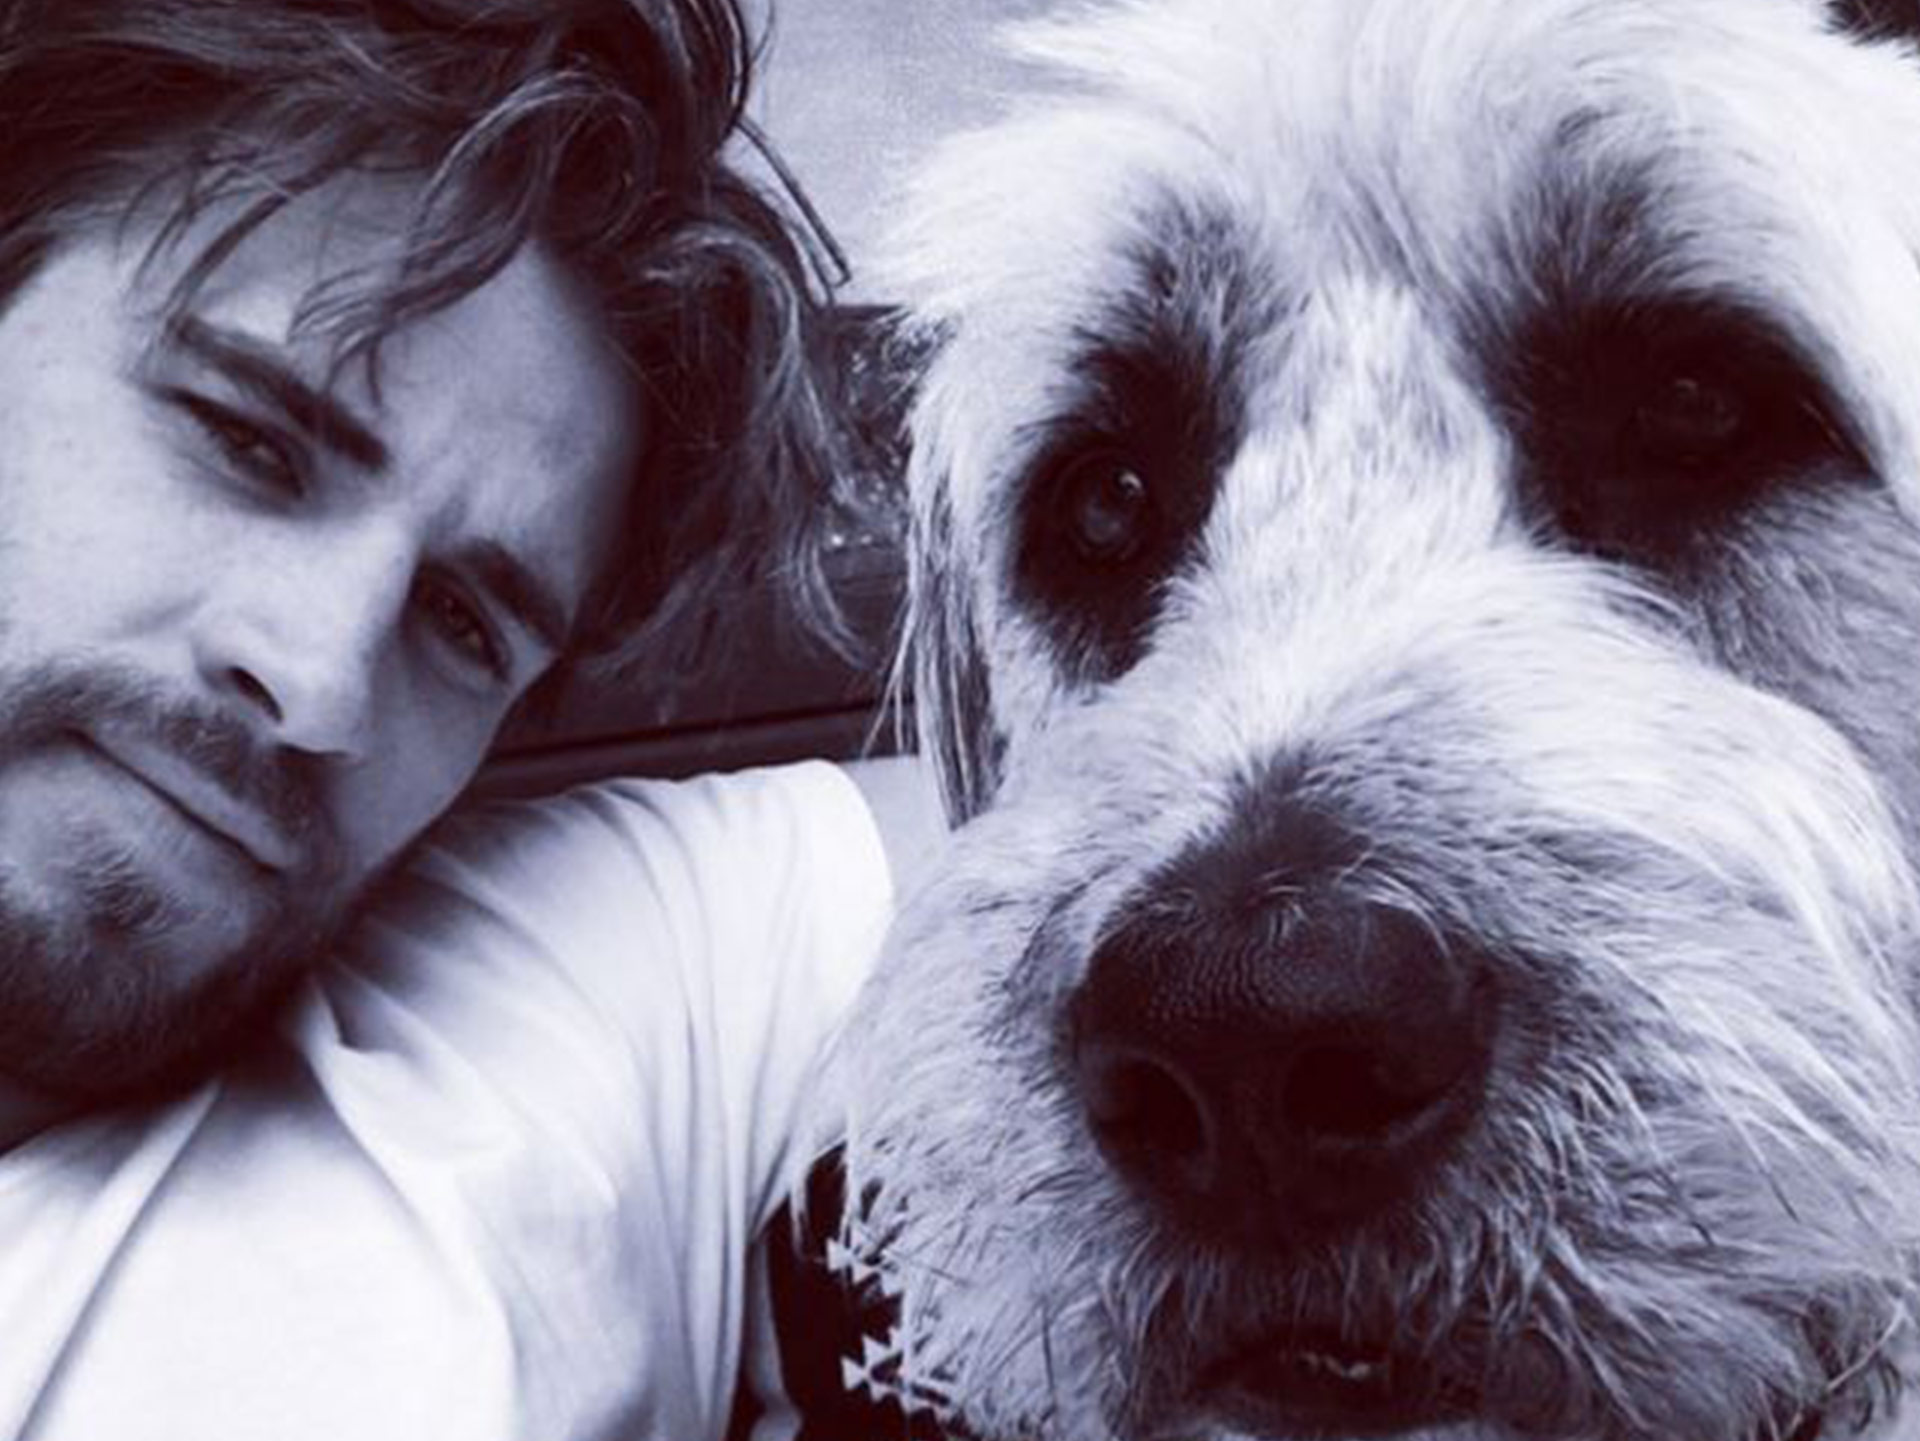 Liam Hemsworth named Doggy Dad of the year and we have the swoon-worthy pics to prove it